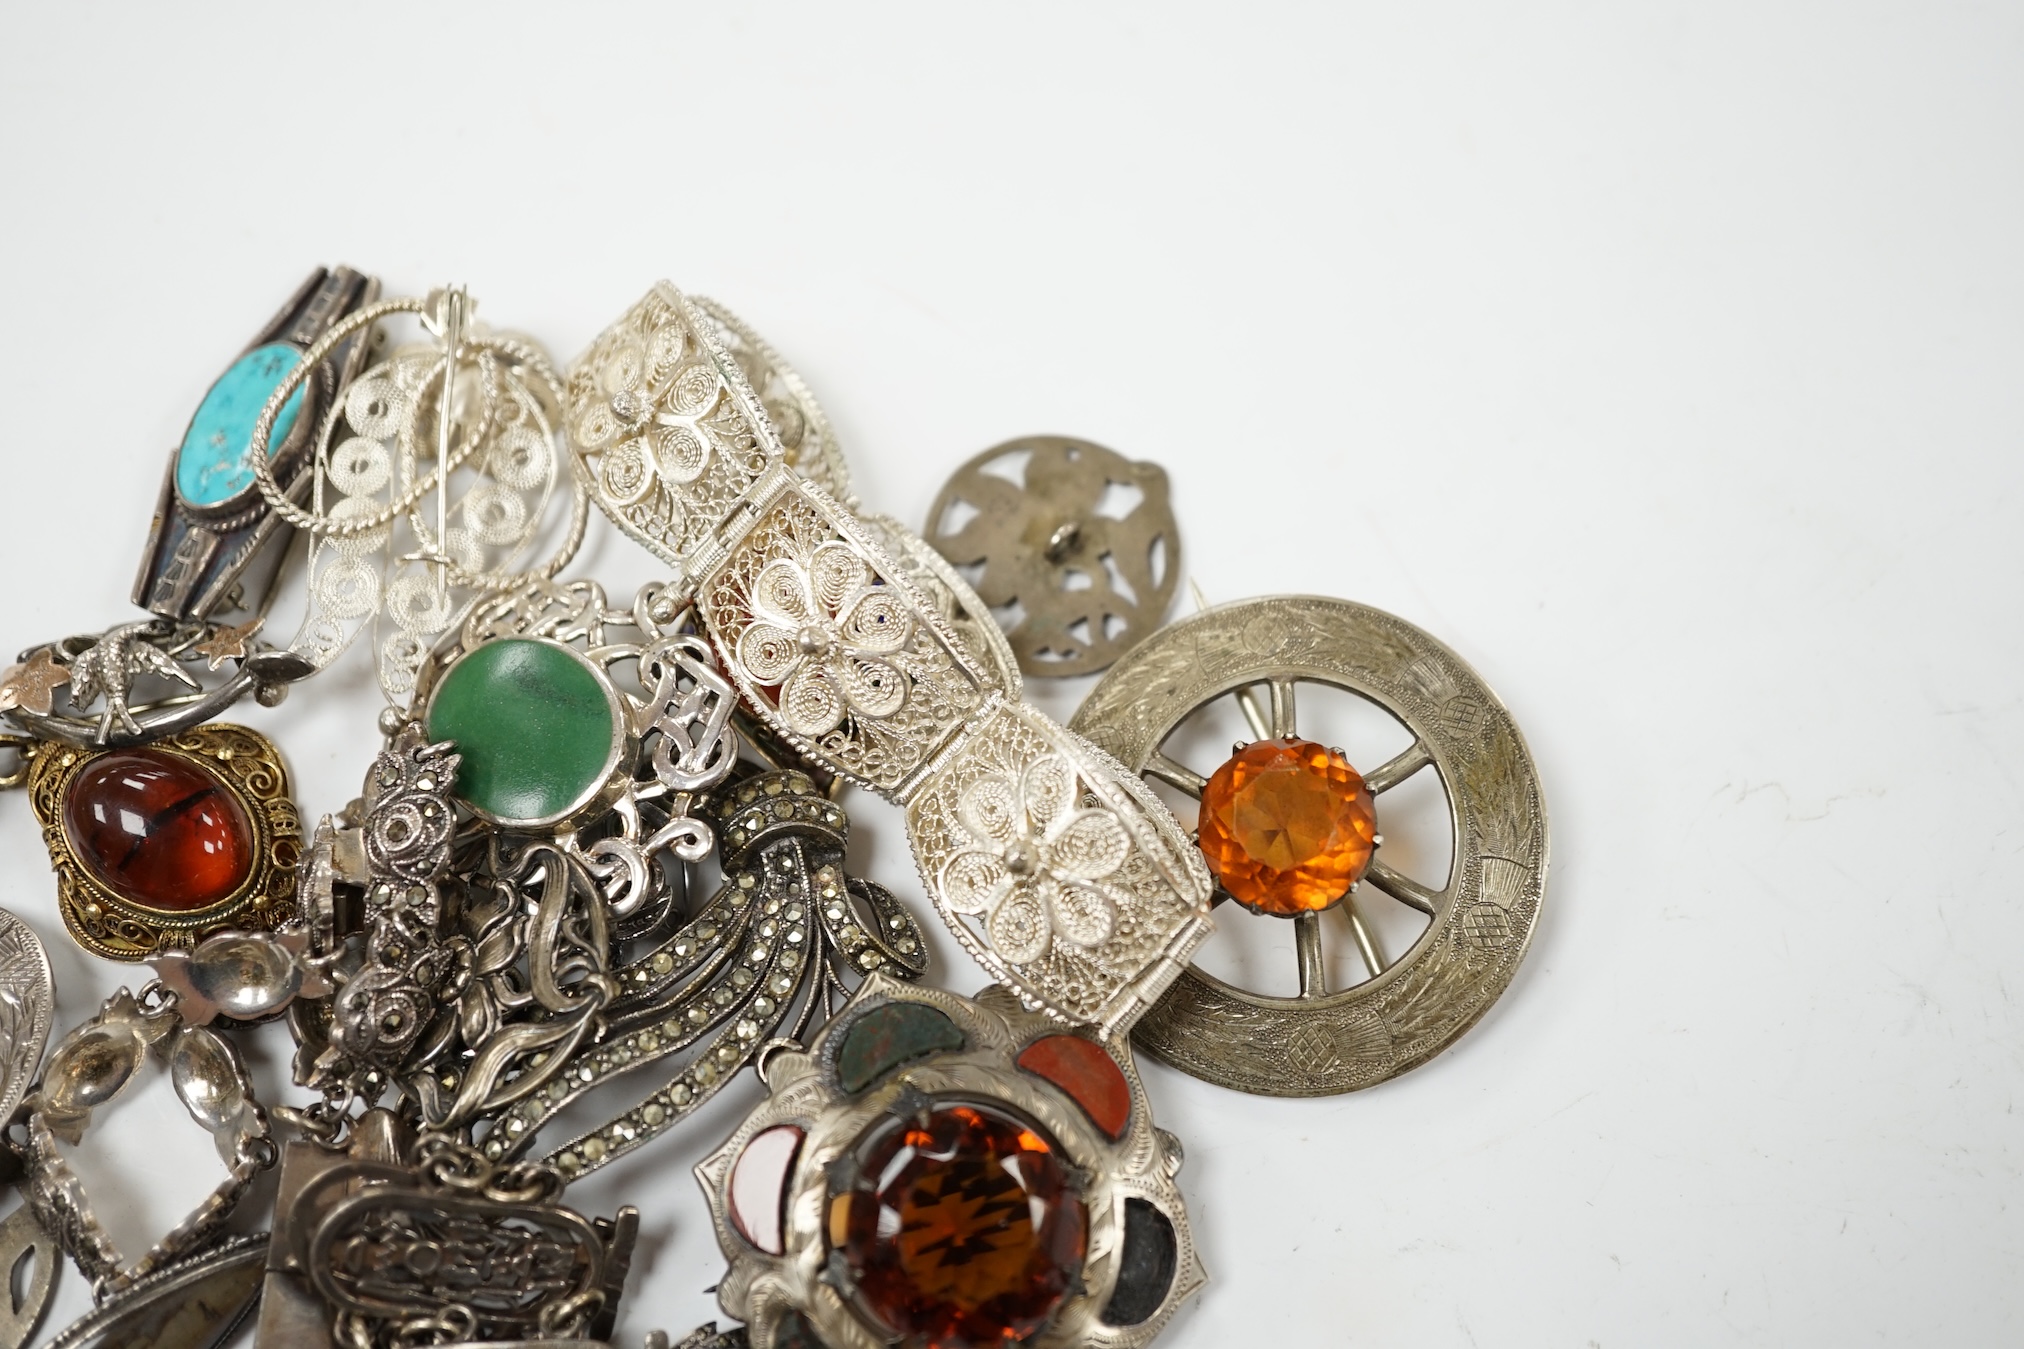 A small quantity of assorted silver and white metal jewellery including filigree bracelet, Scottish hardstone and gem set brooches, etc. Condition - poor to fair